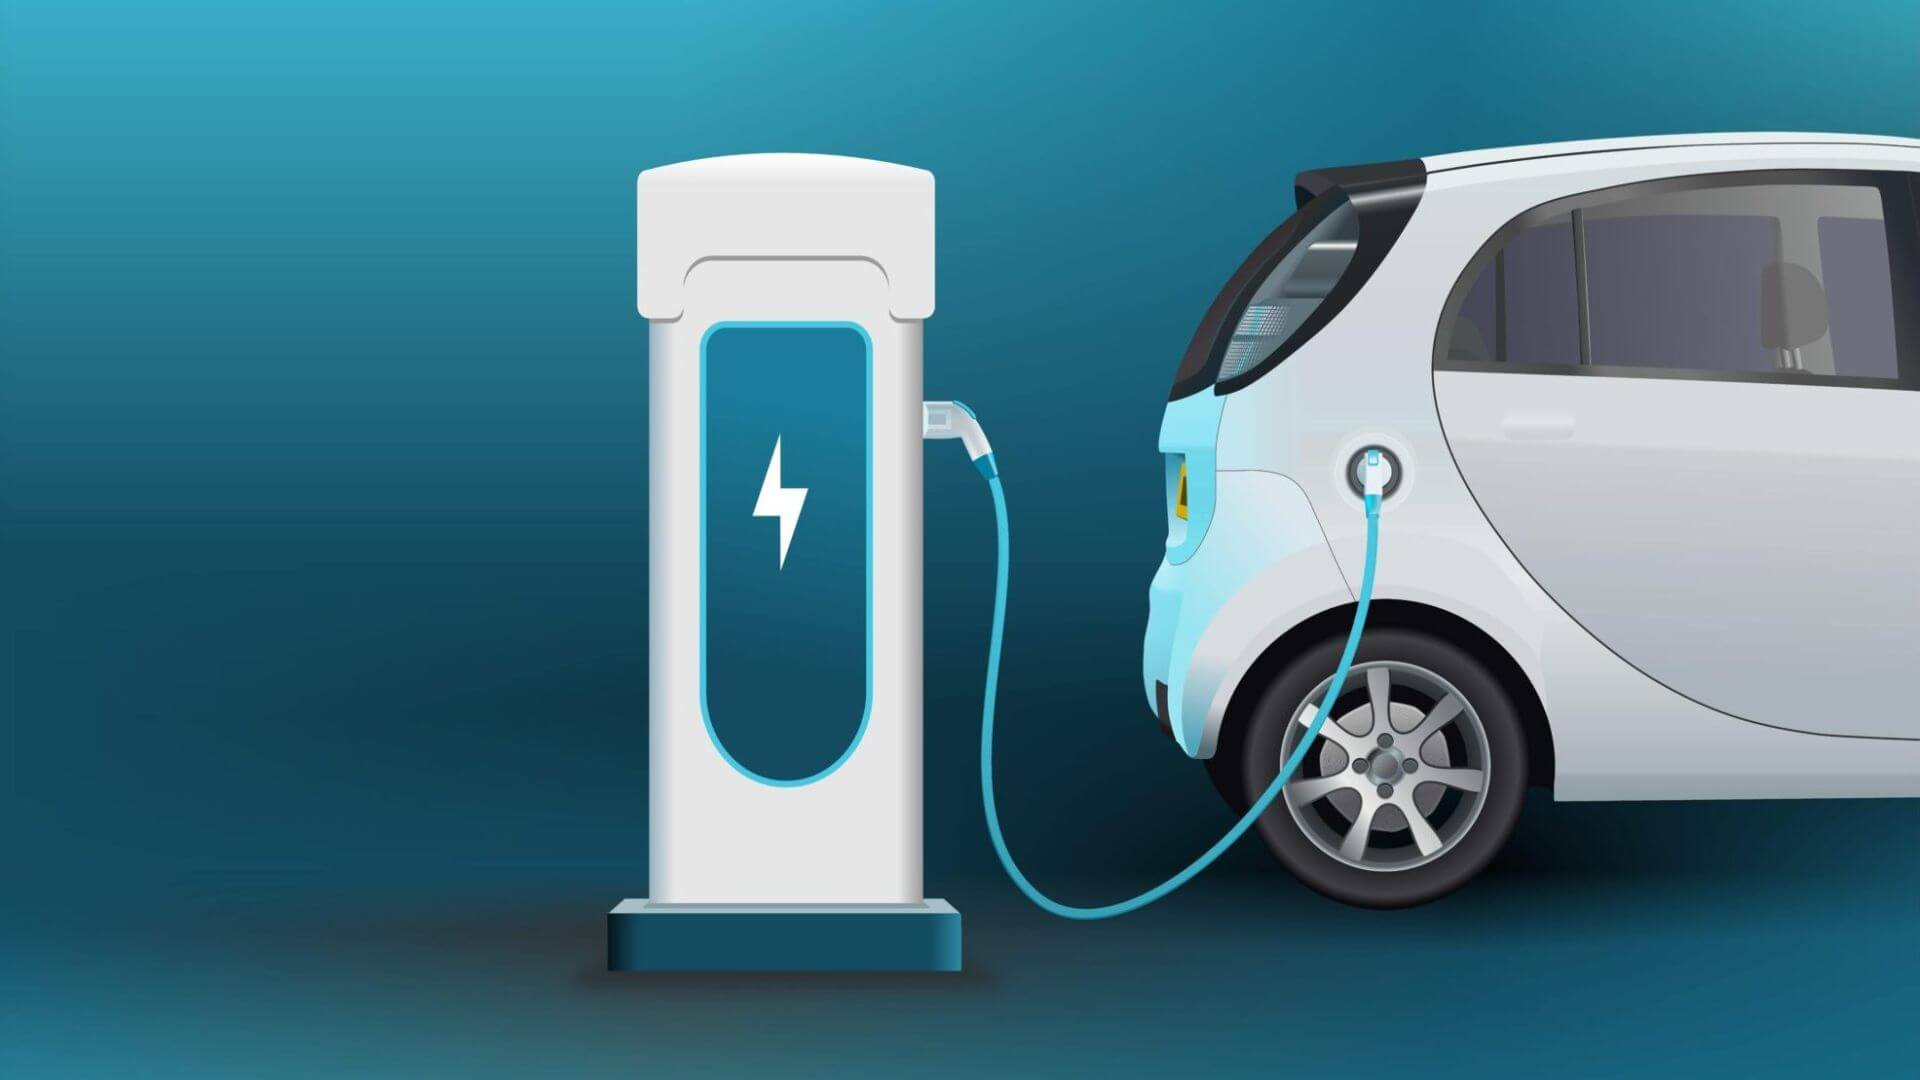 India’s Passenger EV Market Set to Surge in the Next 3-4 Years